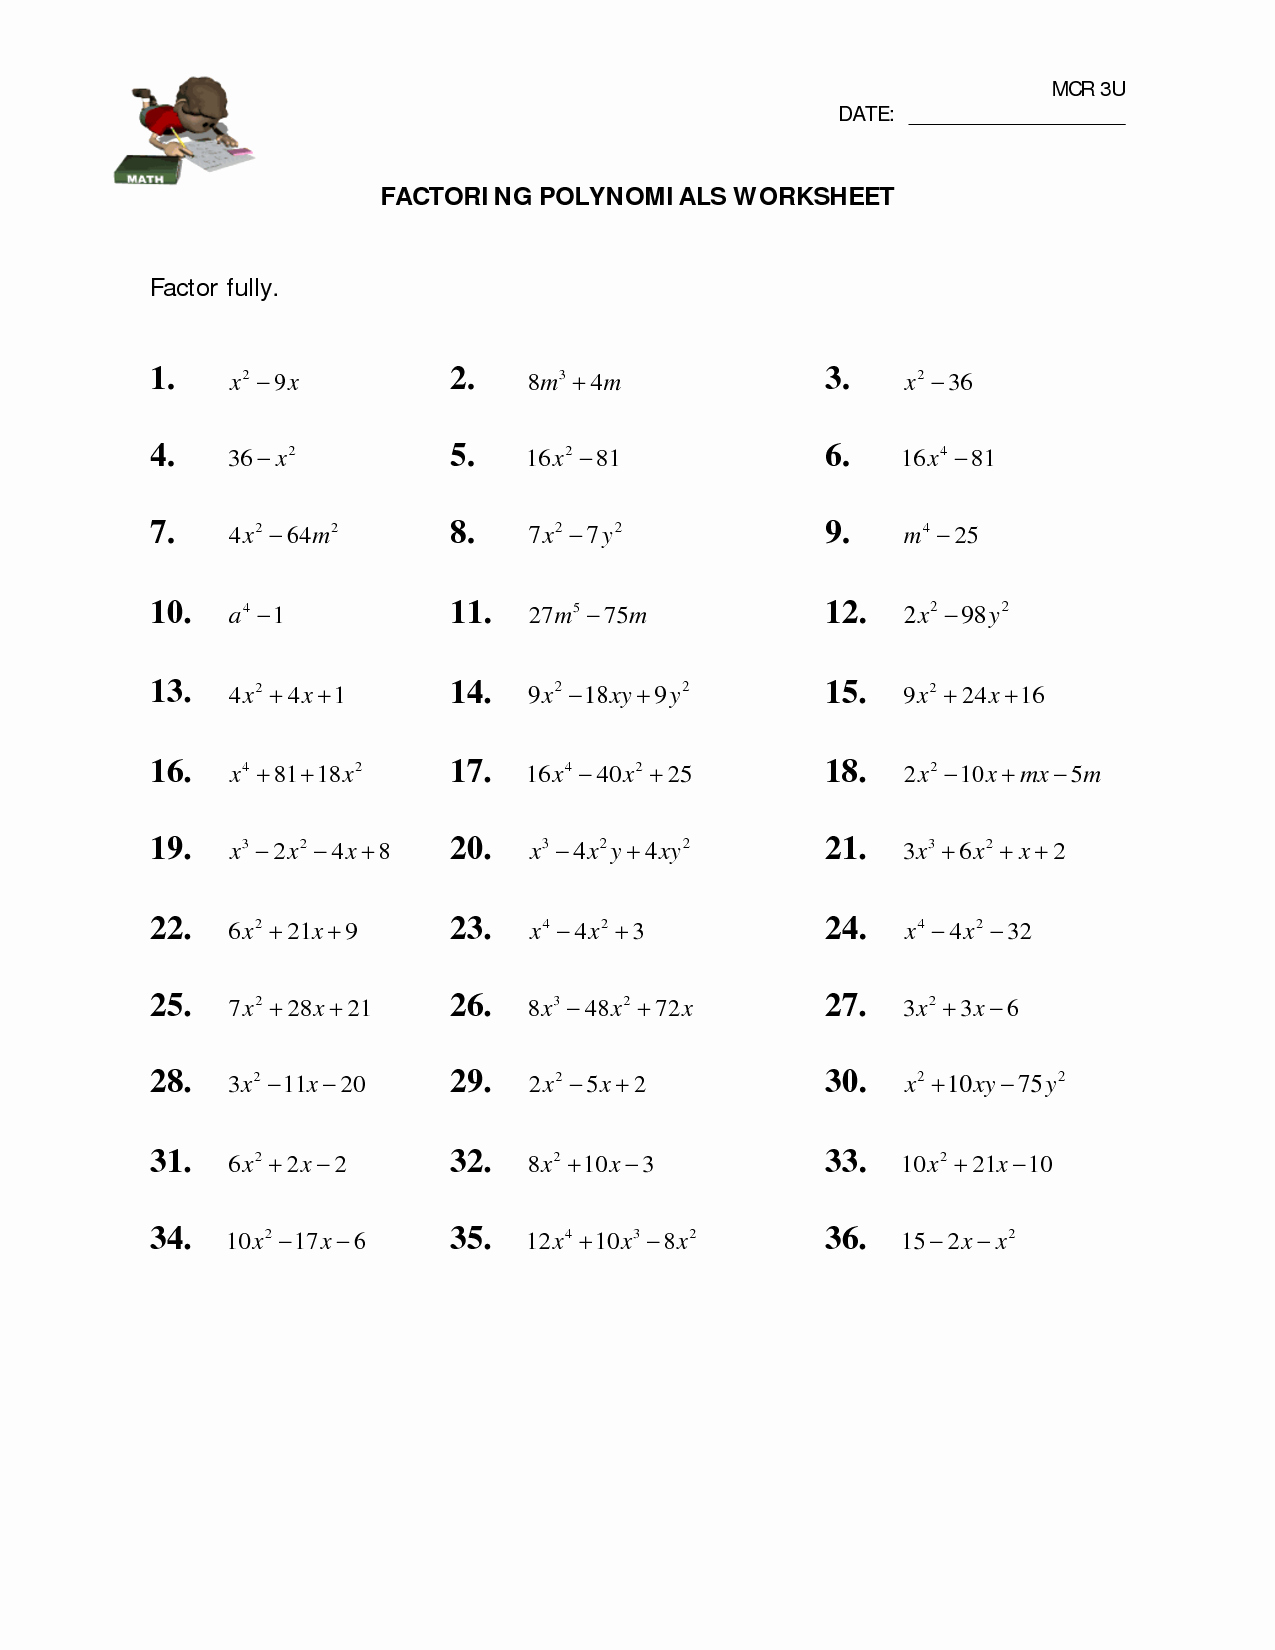 Factoring Practice Worksheet Answers Best Of 10 Best Of Factoring Polynomials Practice Worksheet